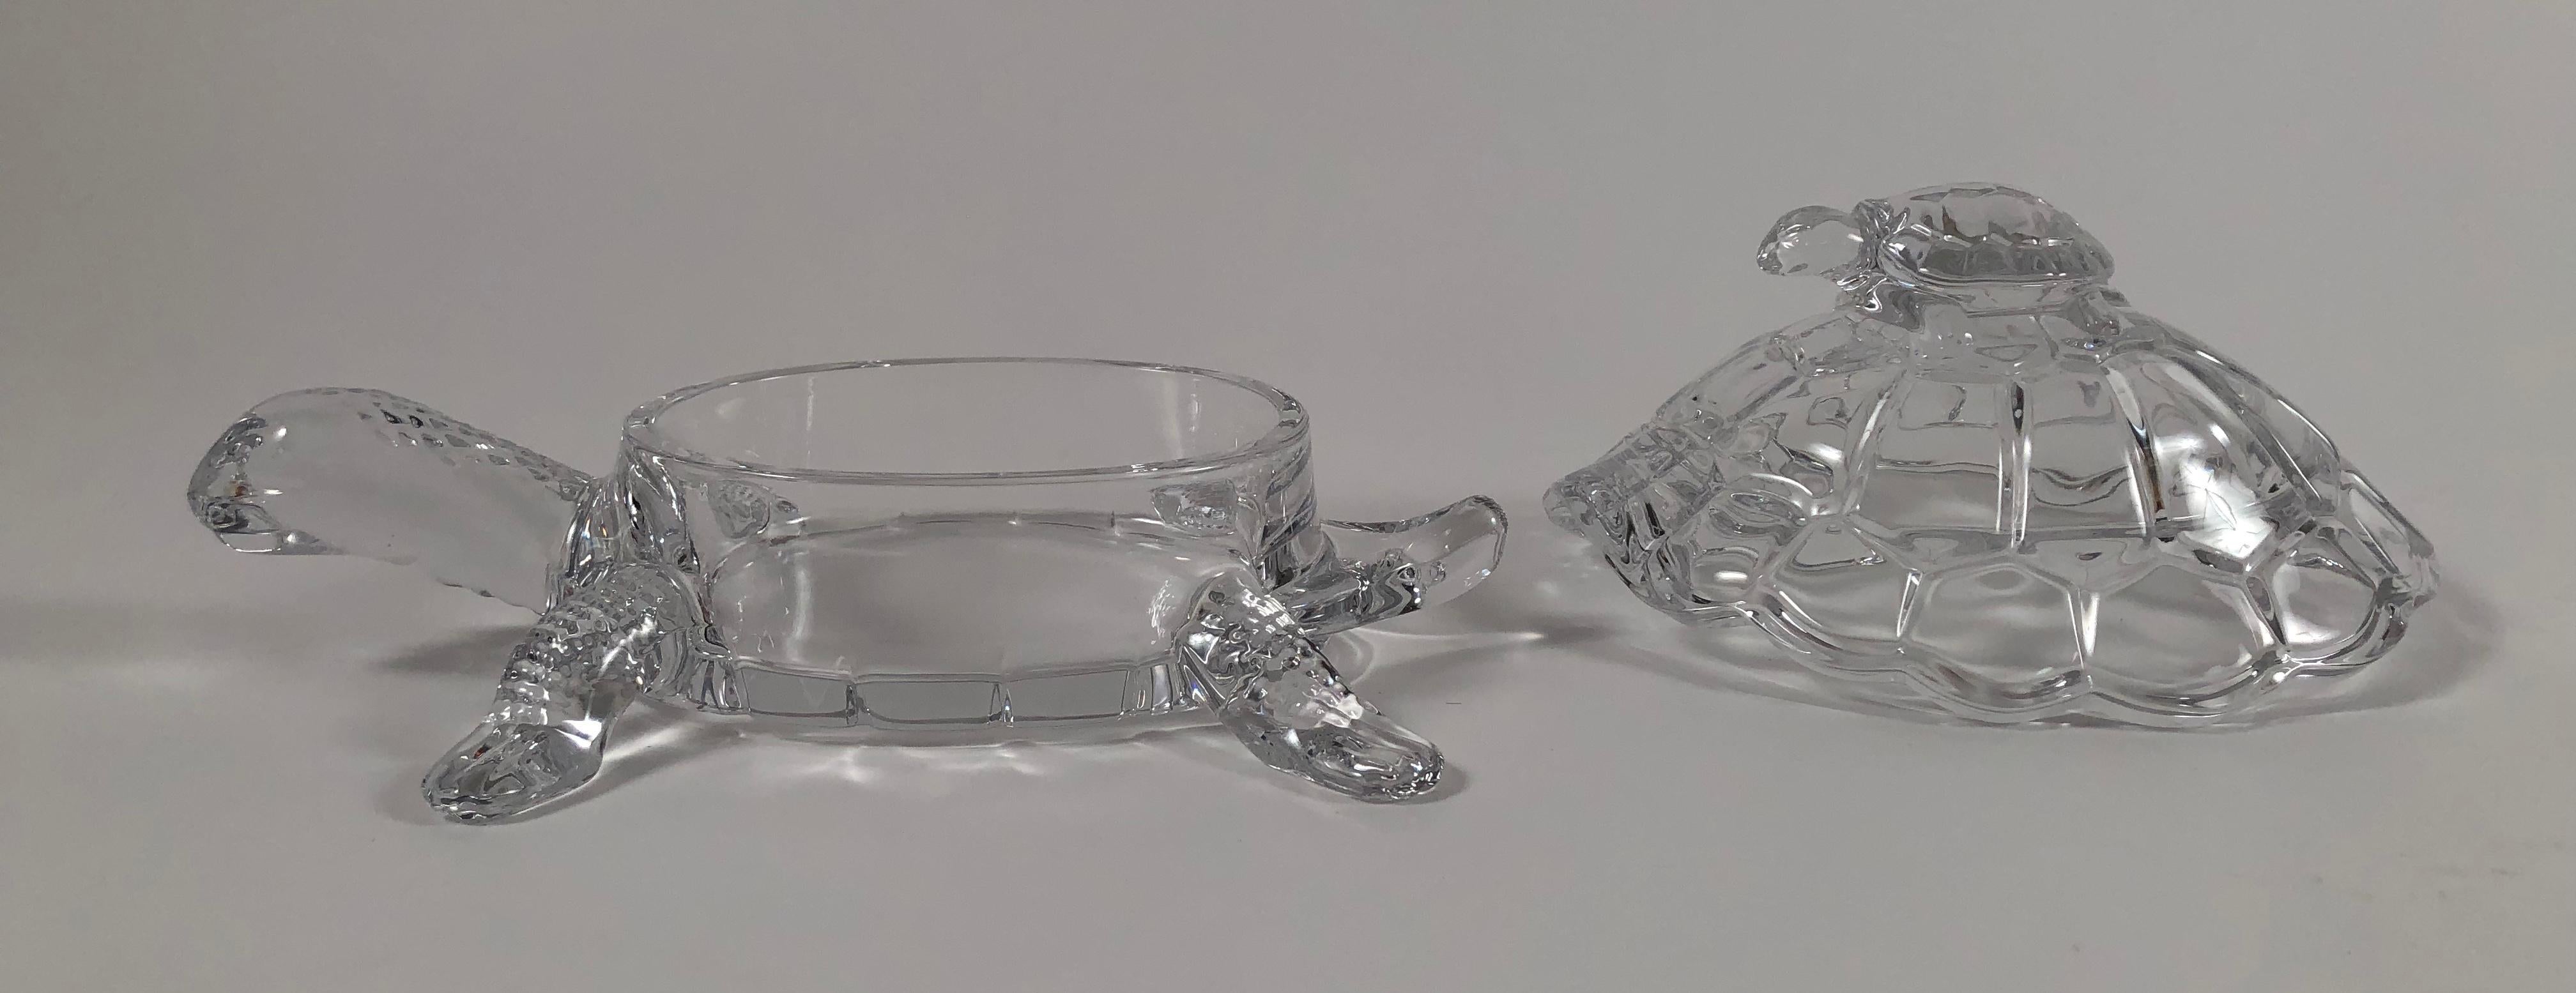 turtle candy dish